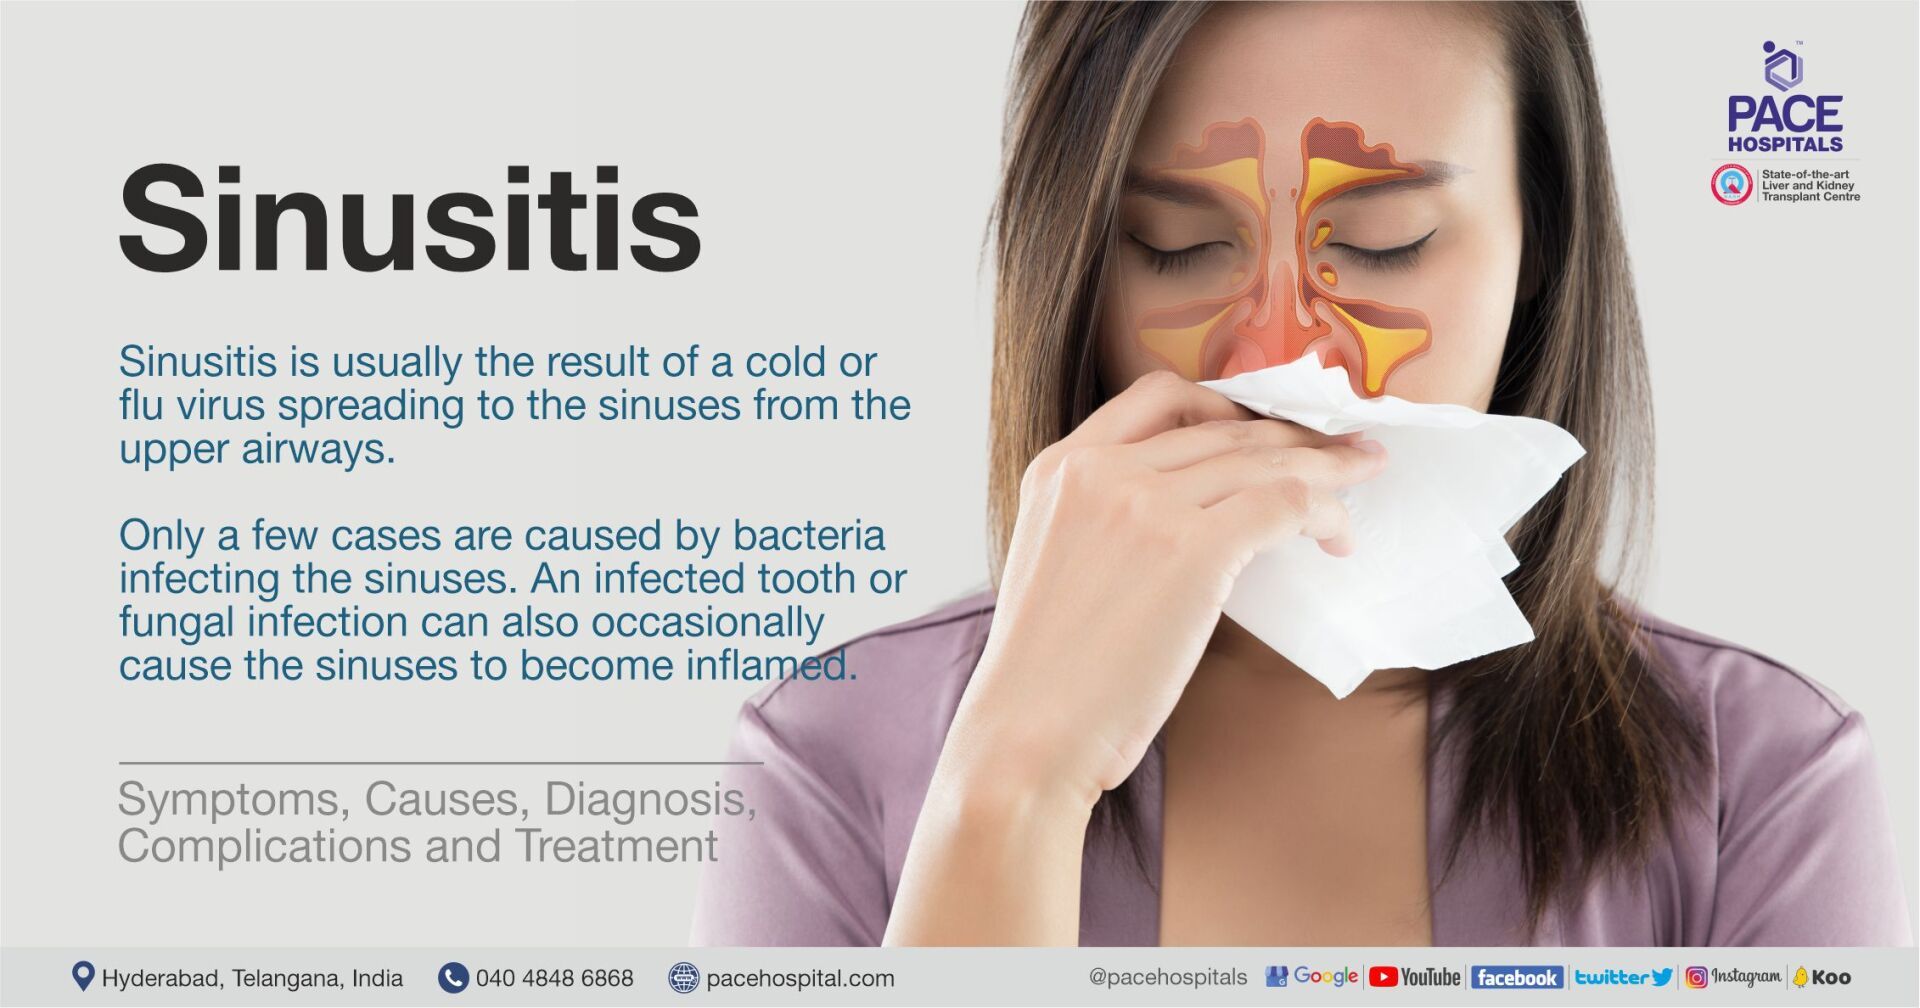 Sinusitis - Types, Causes, Symptoms, Diagnosis, Complications and Treatment